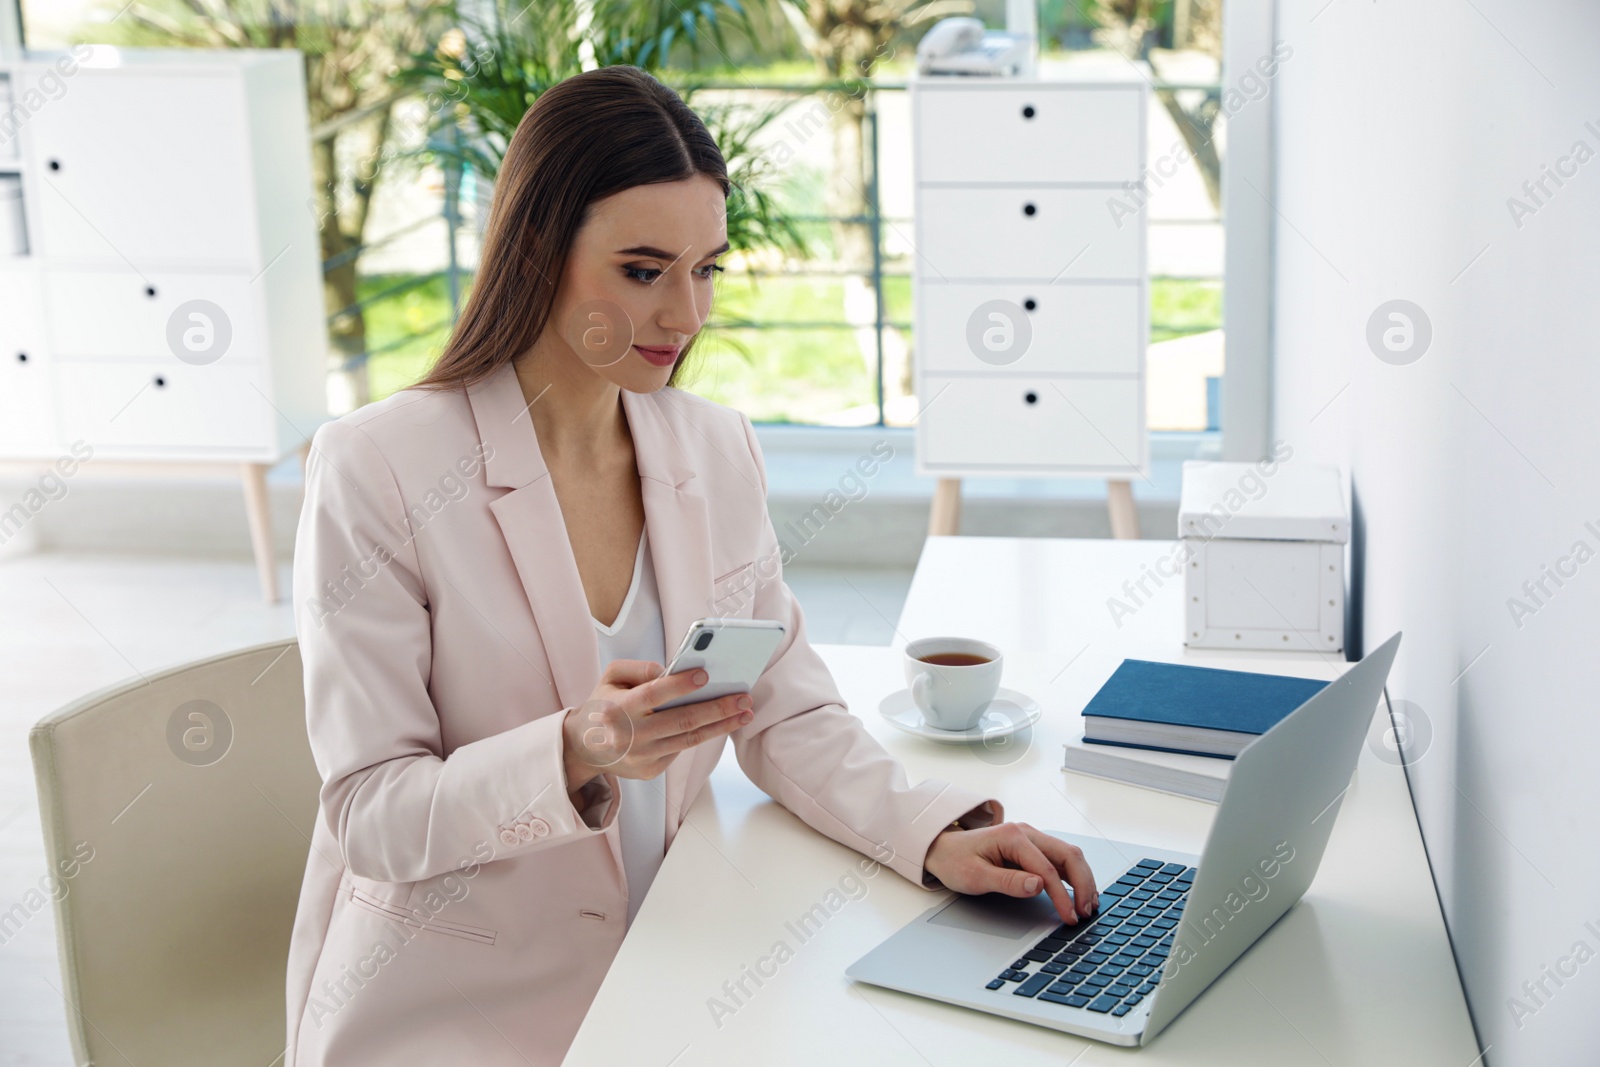 Image of Young woman using phone and laptop in office